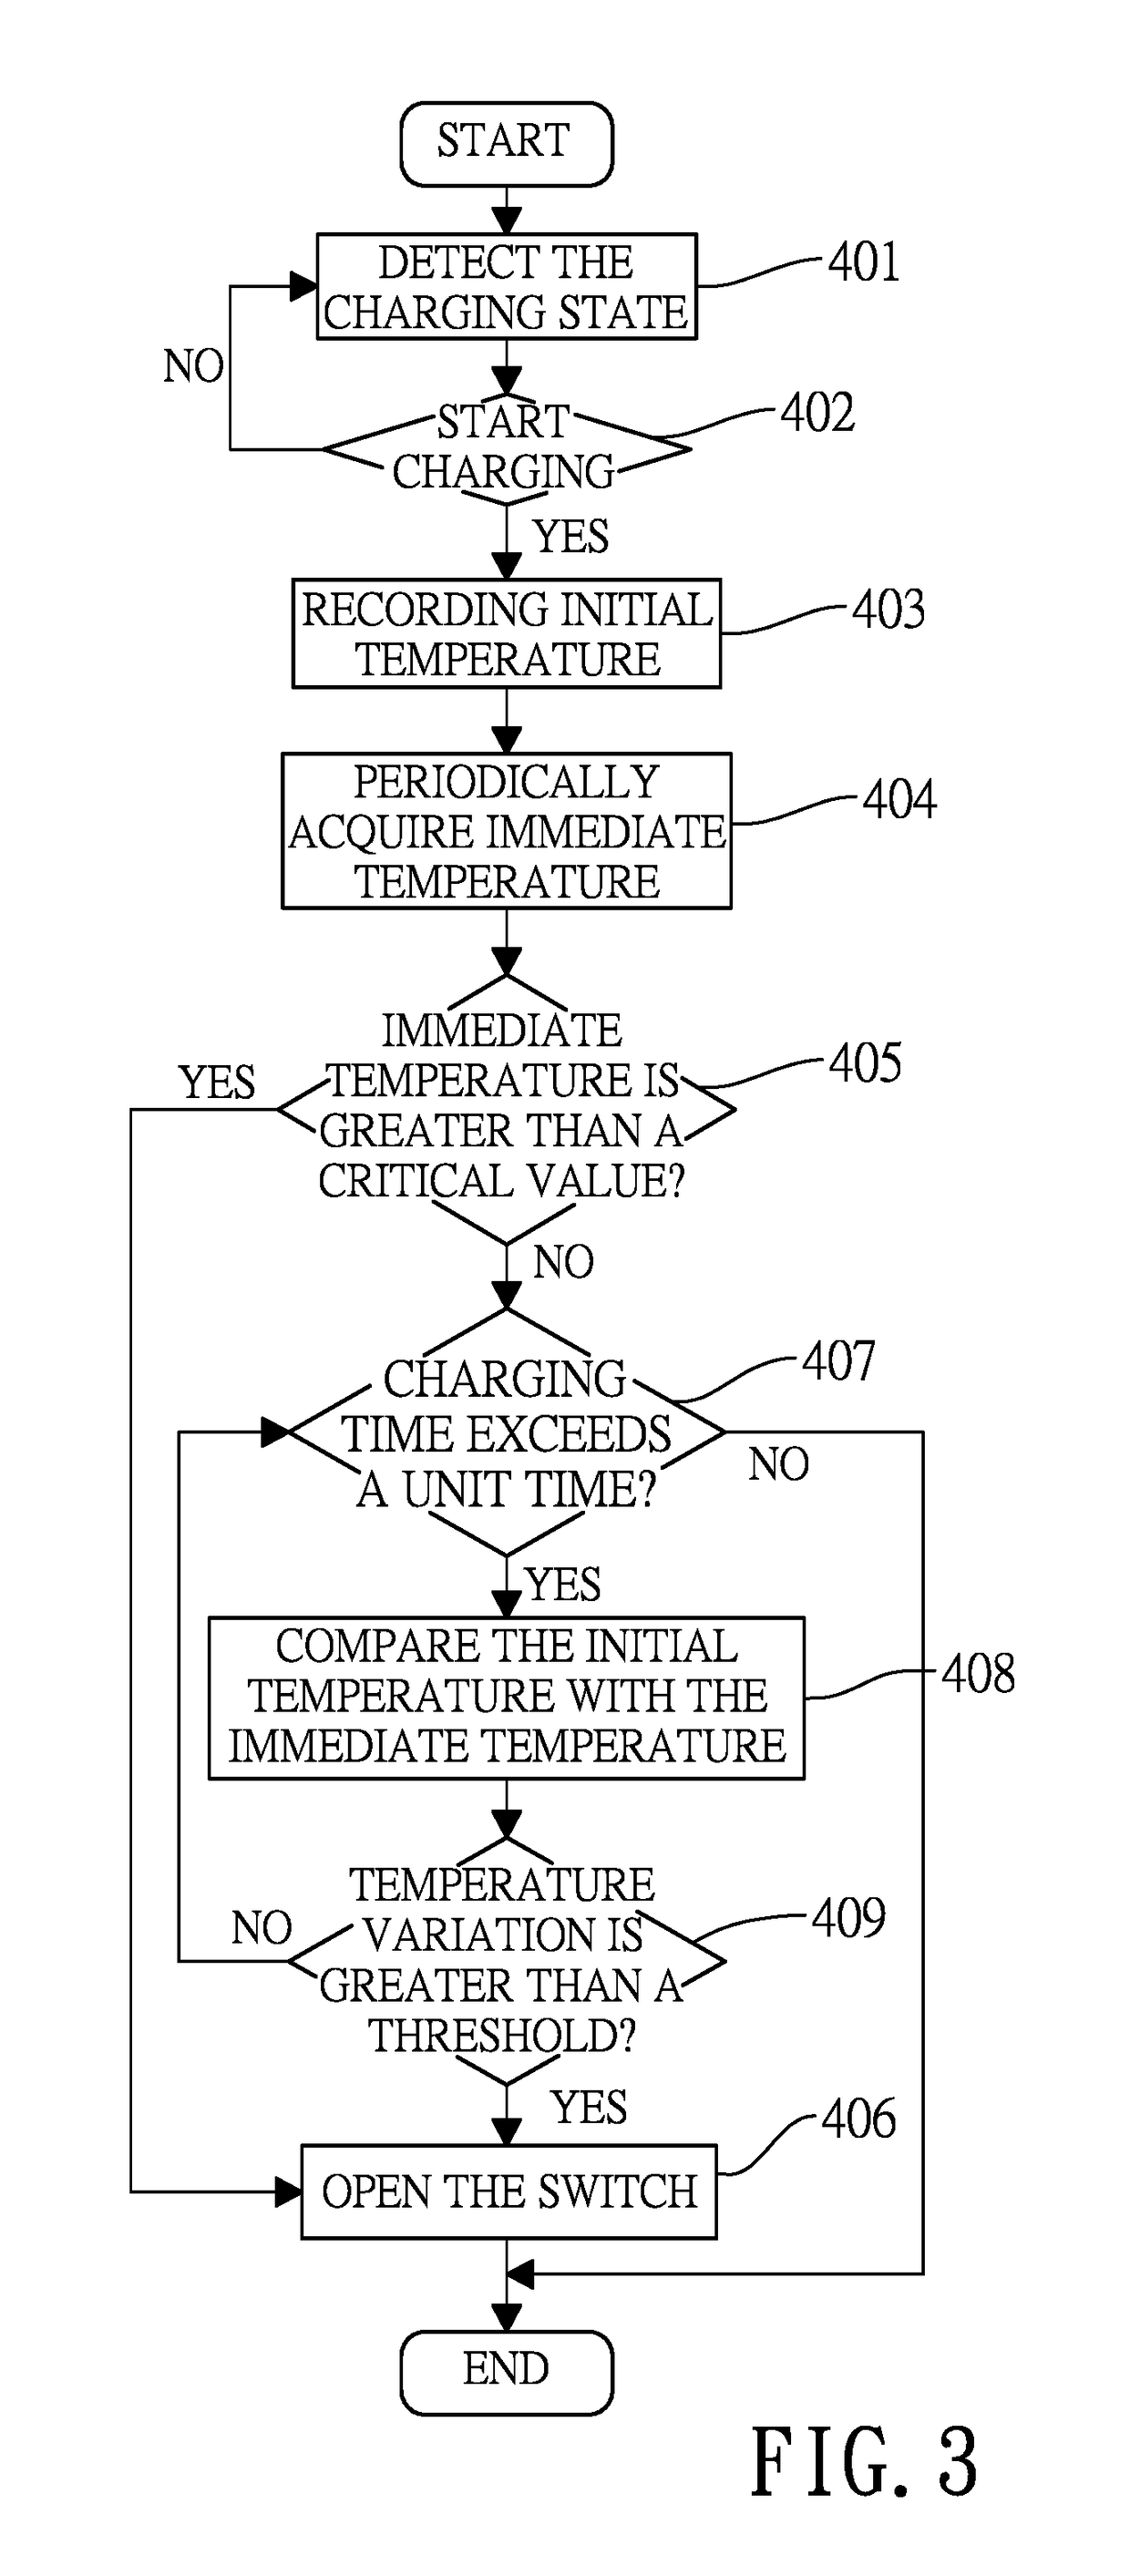 Over-temperature protection system of a charging device